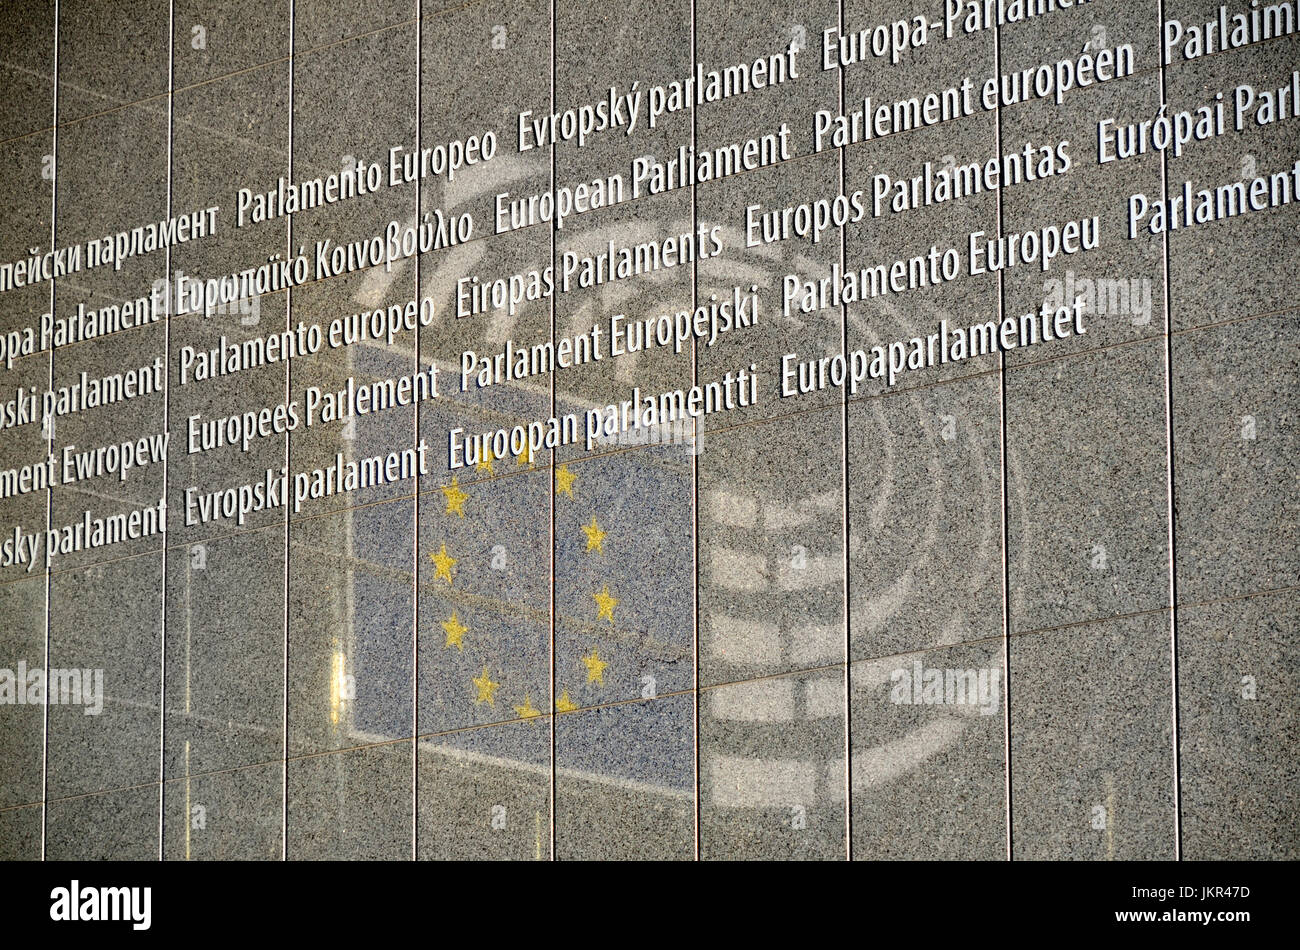 Brussels, Belgium. European Parliament Building. All the languages of the EU and reflection of the Parliament symbol at the main entrance Stock Photo